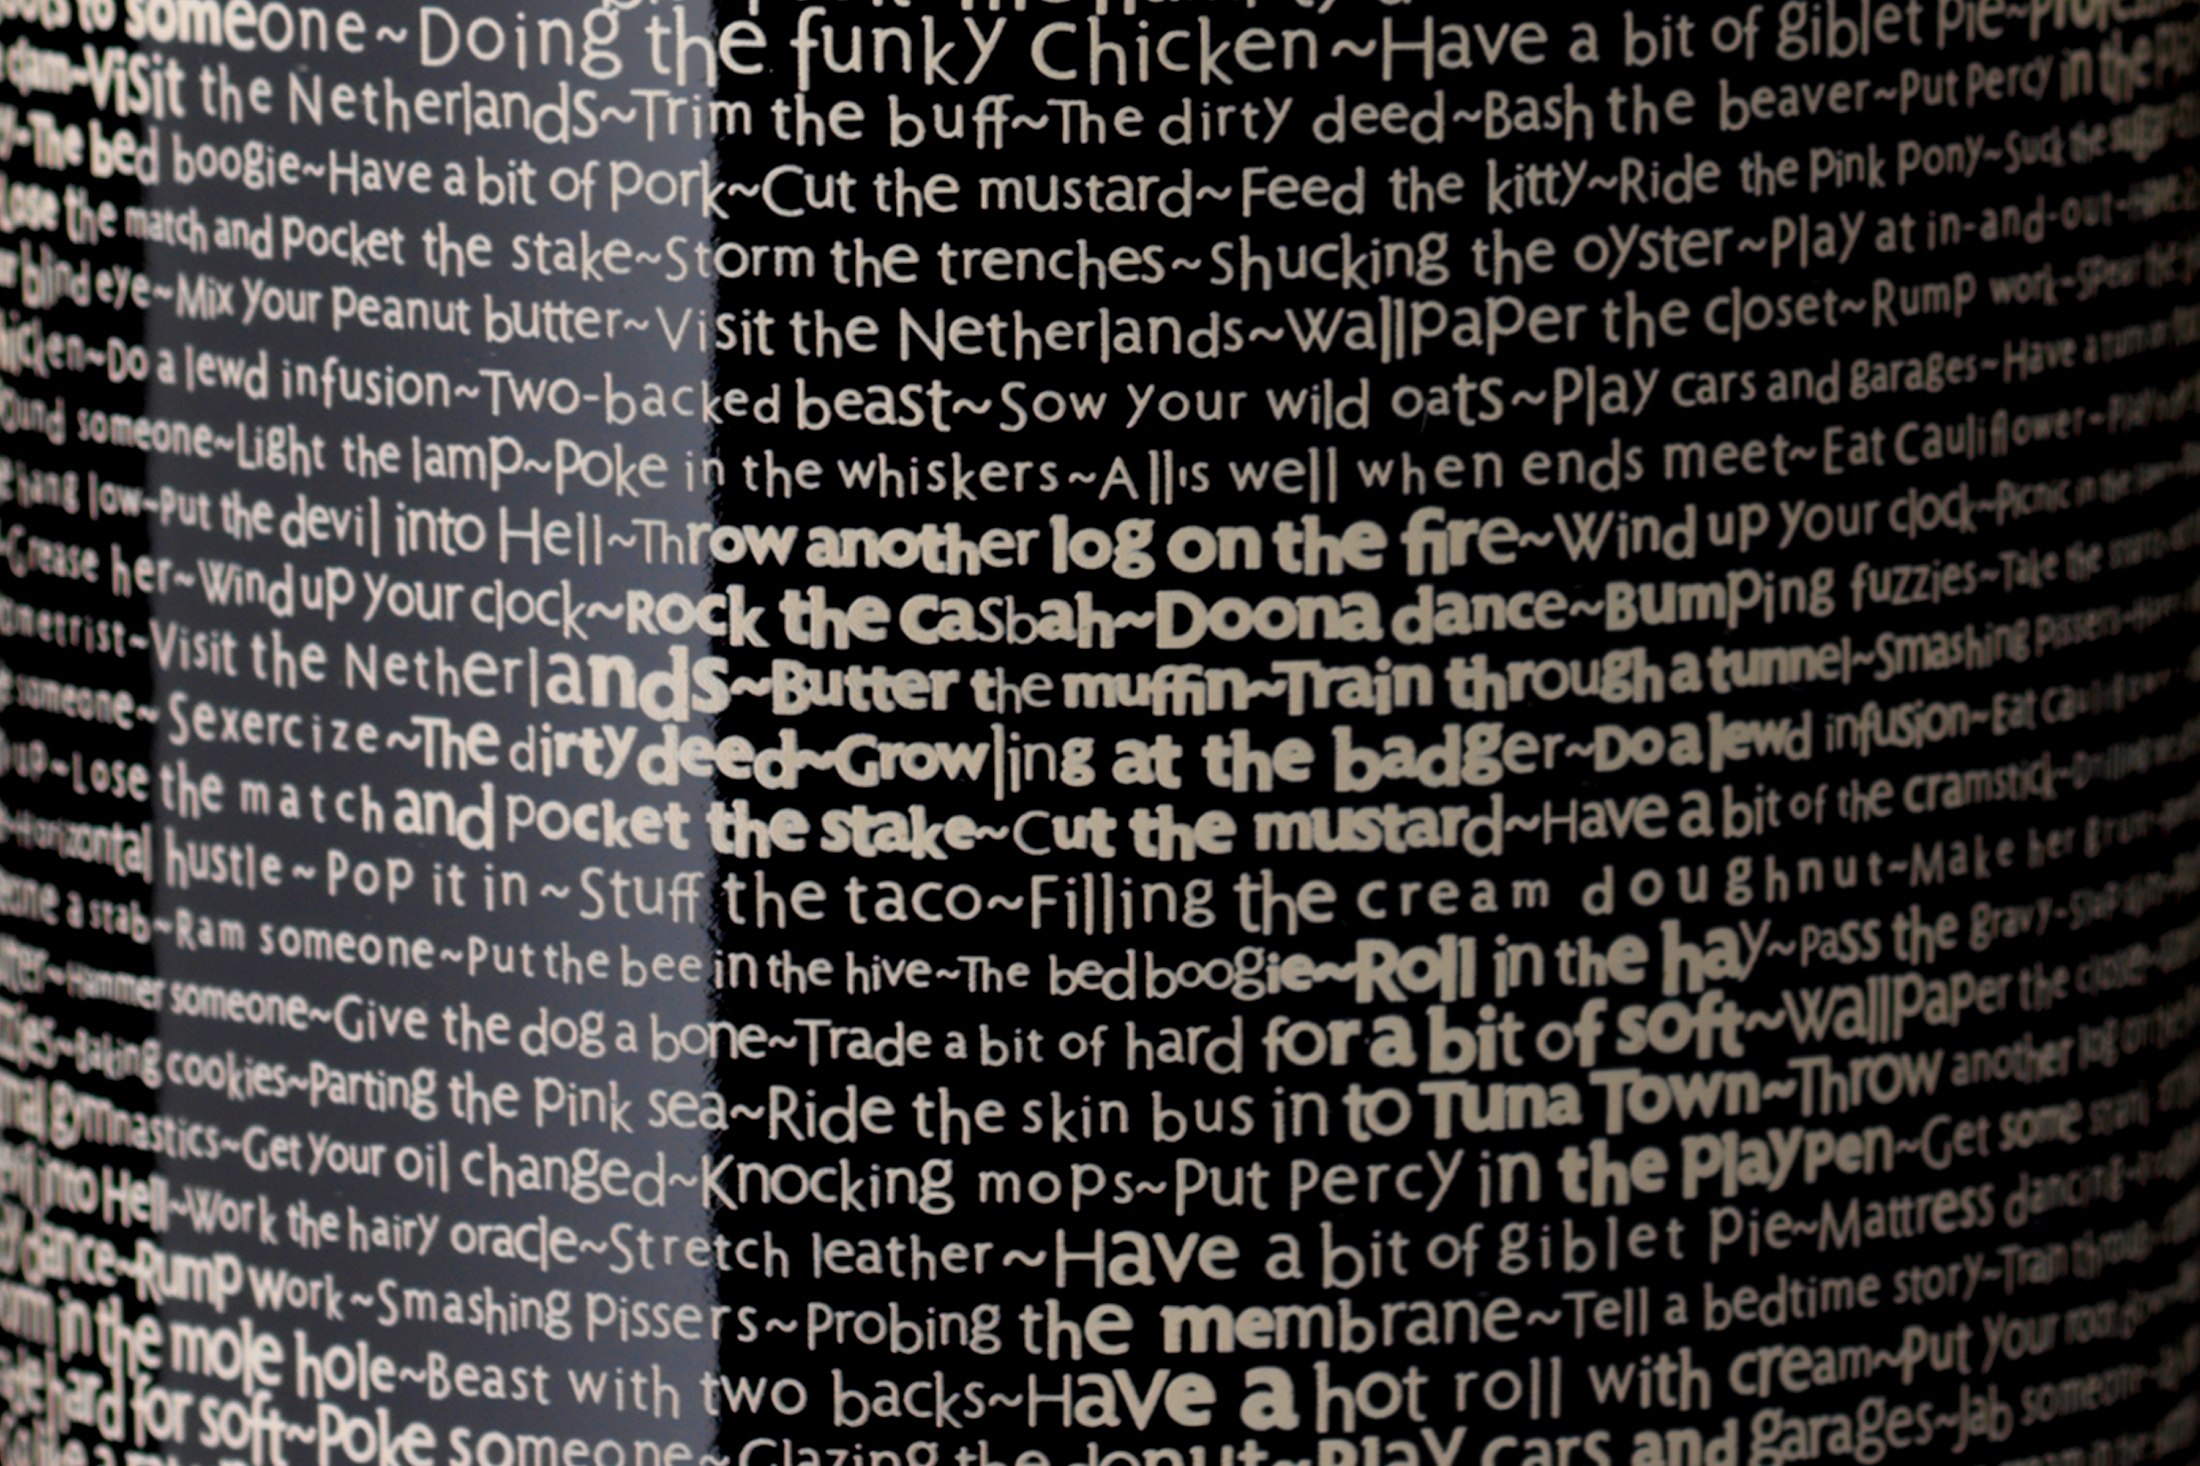 LaurieMillotte-WordofMouth-detail.jpg